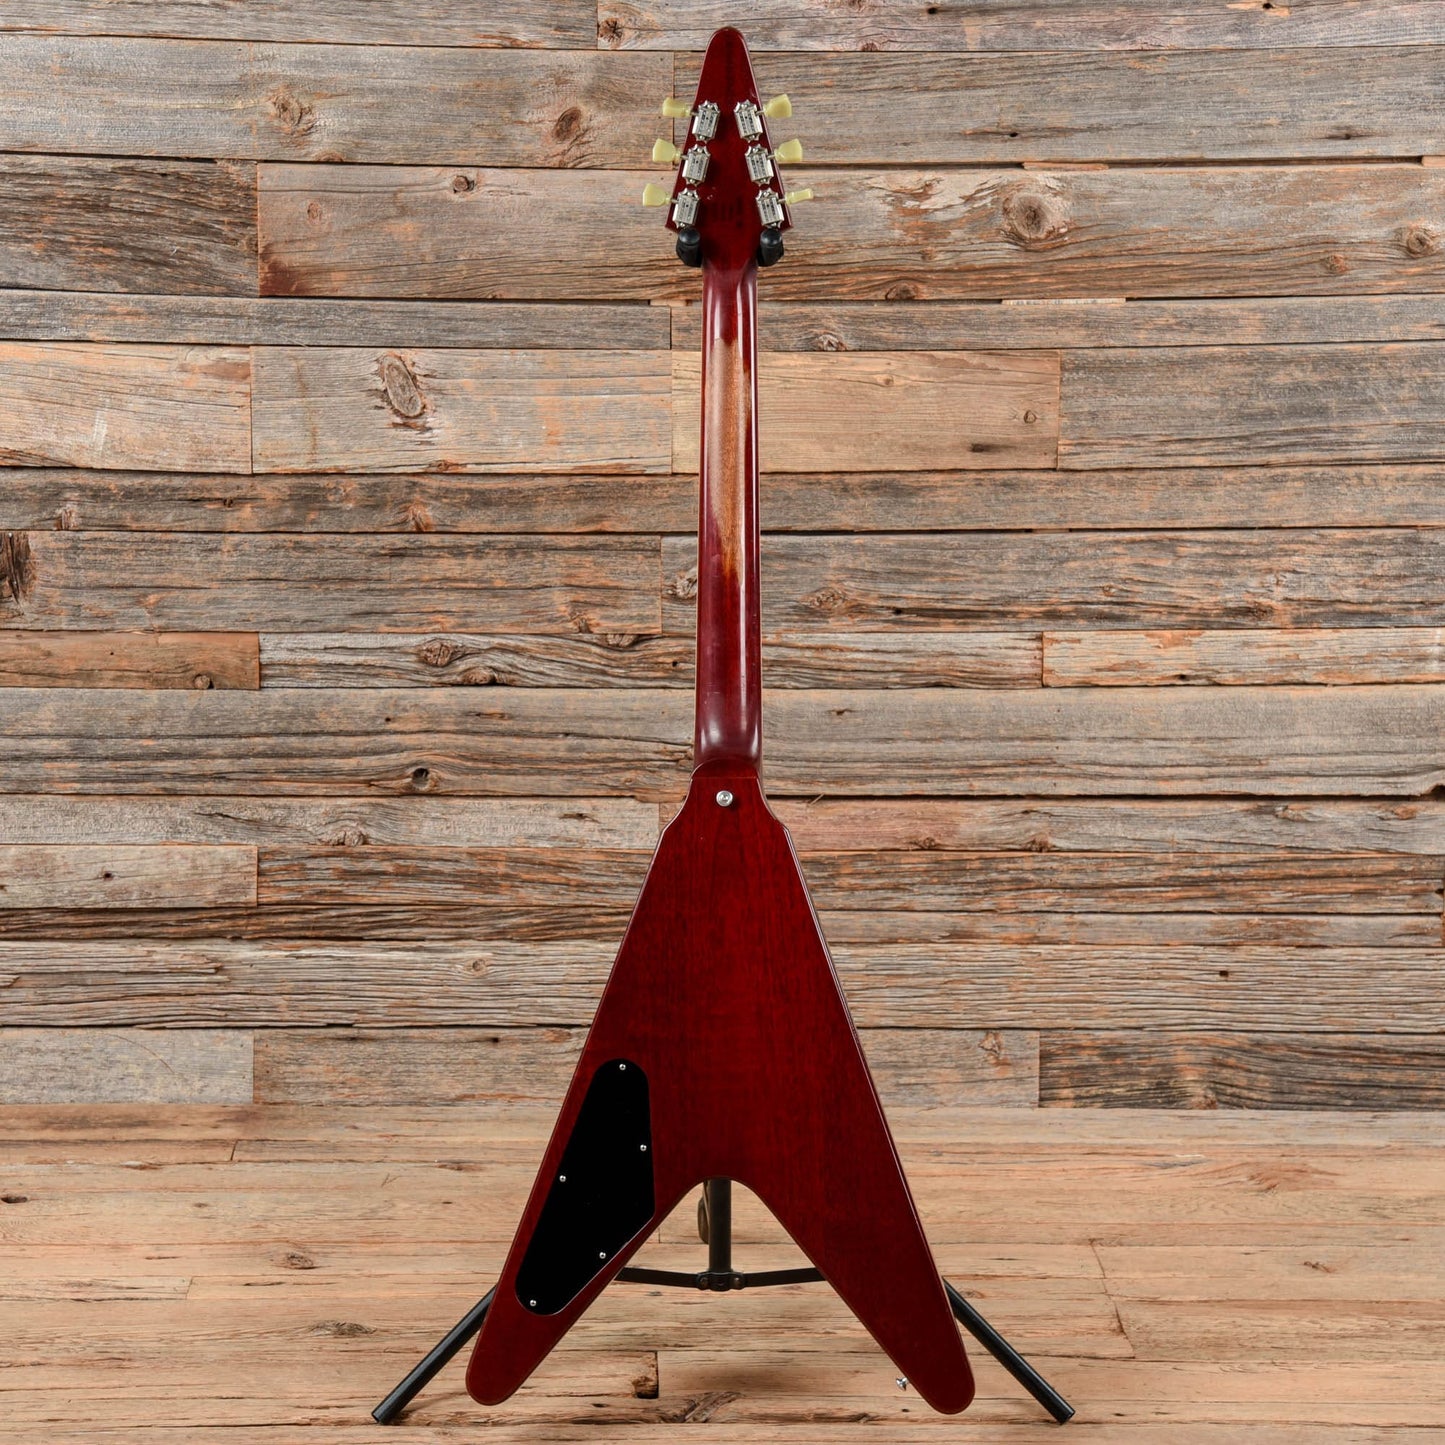 Gibson Flying V Pro T Cherry 2016 Electric Guitars / Solid Body